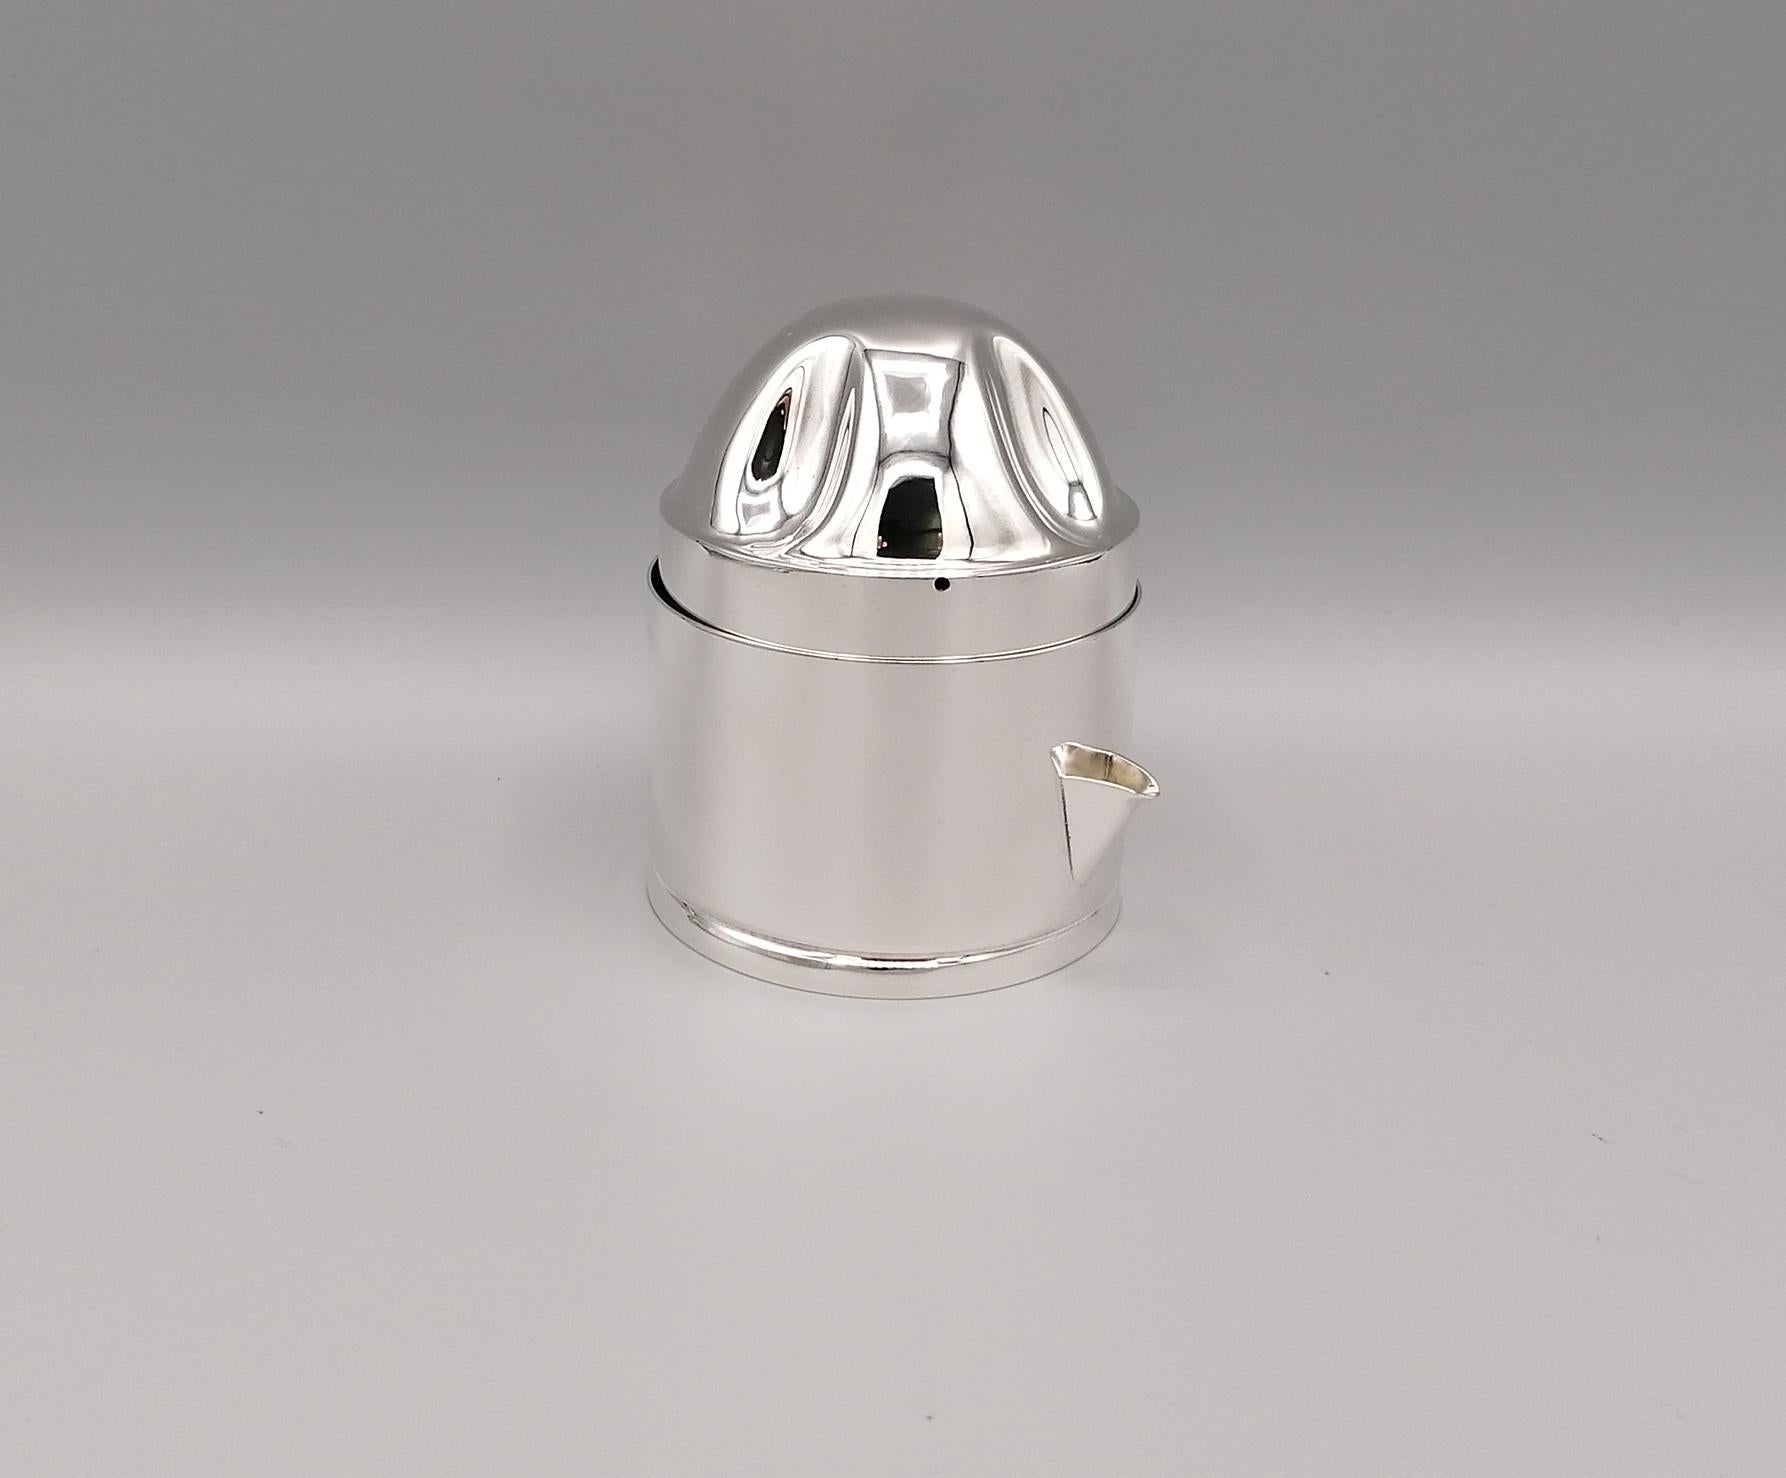 This item is not very easy to find in sterling silver. The citrus juicer was made completely by hand starting from the raw 925 silver sheet.
The body shape is cylindrical and smooth.
From about half the surface, the body of the citrus juicer was